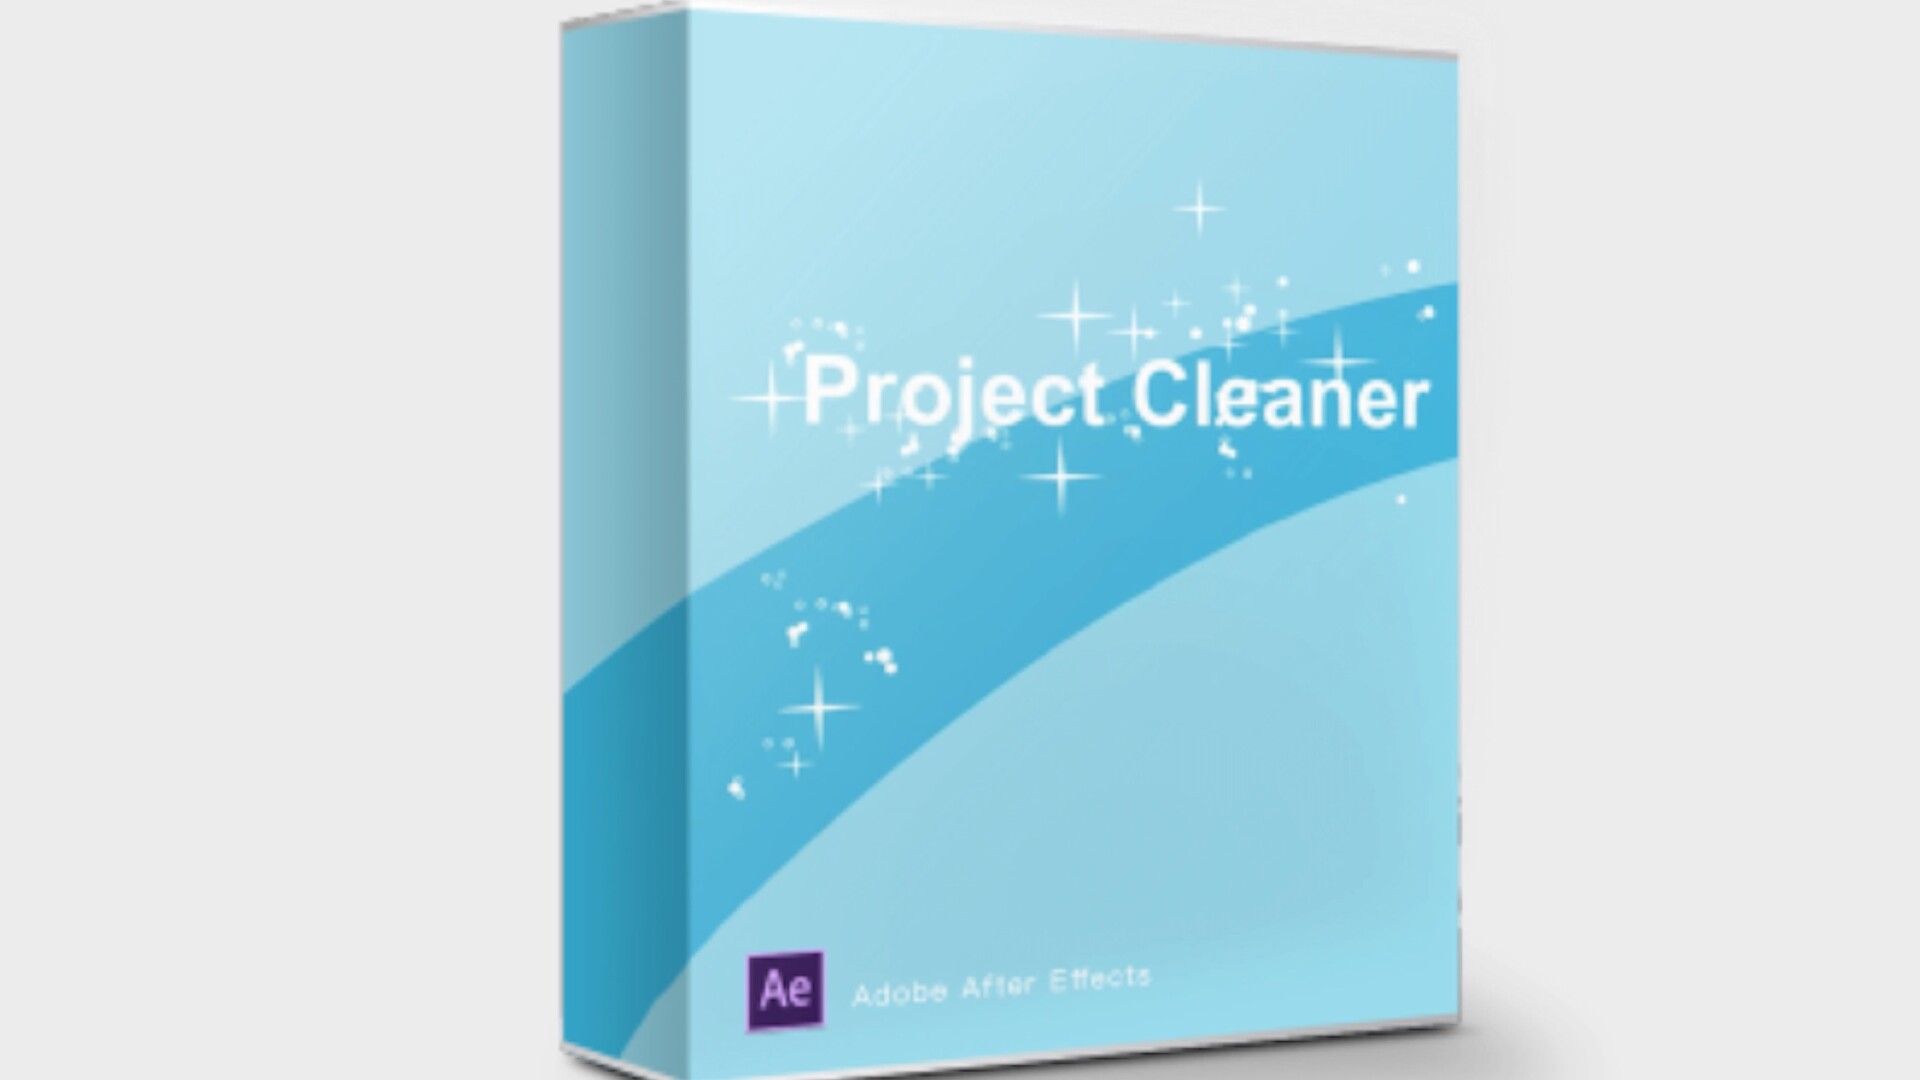  Project Cleaner for Mac(项目清理ae插件)